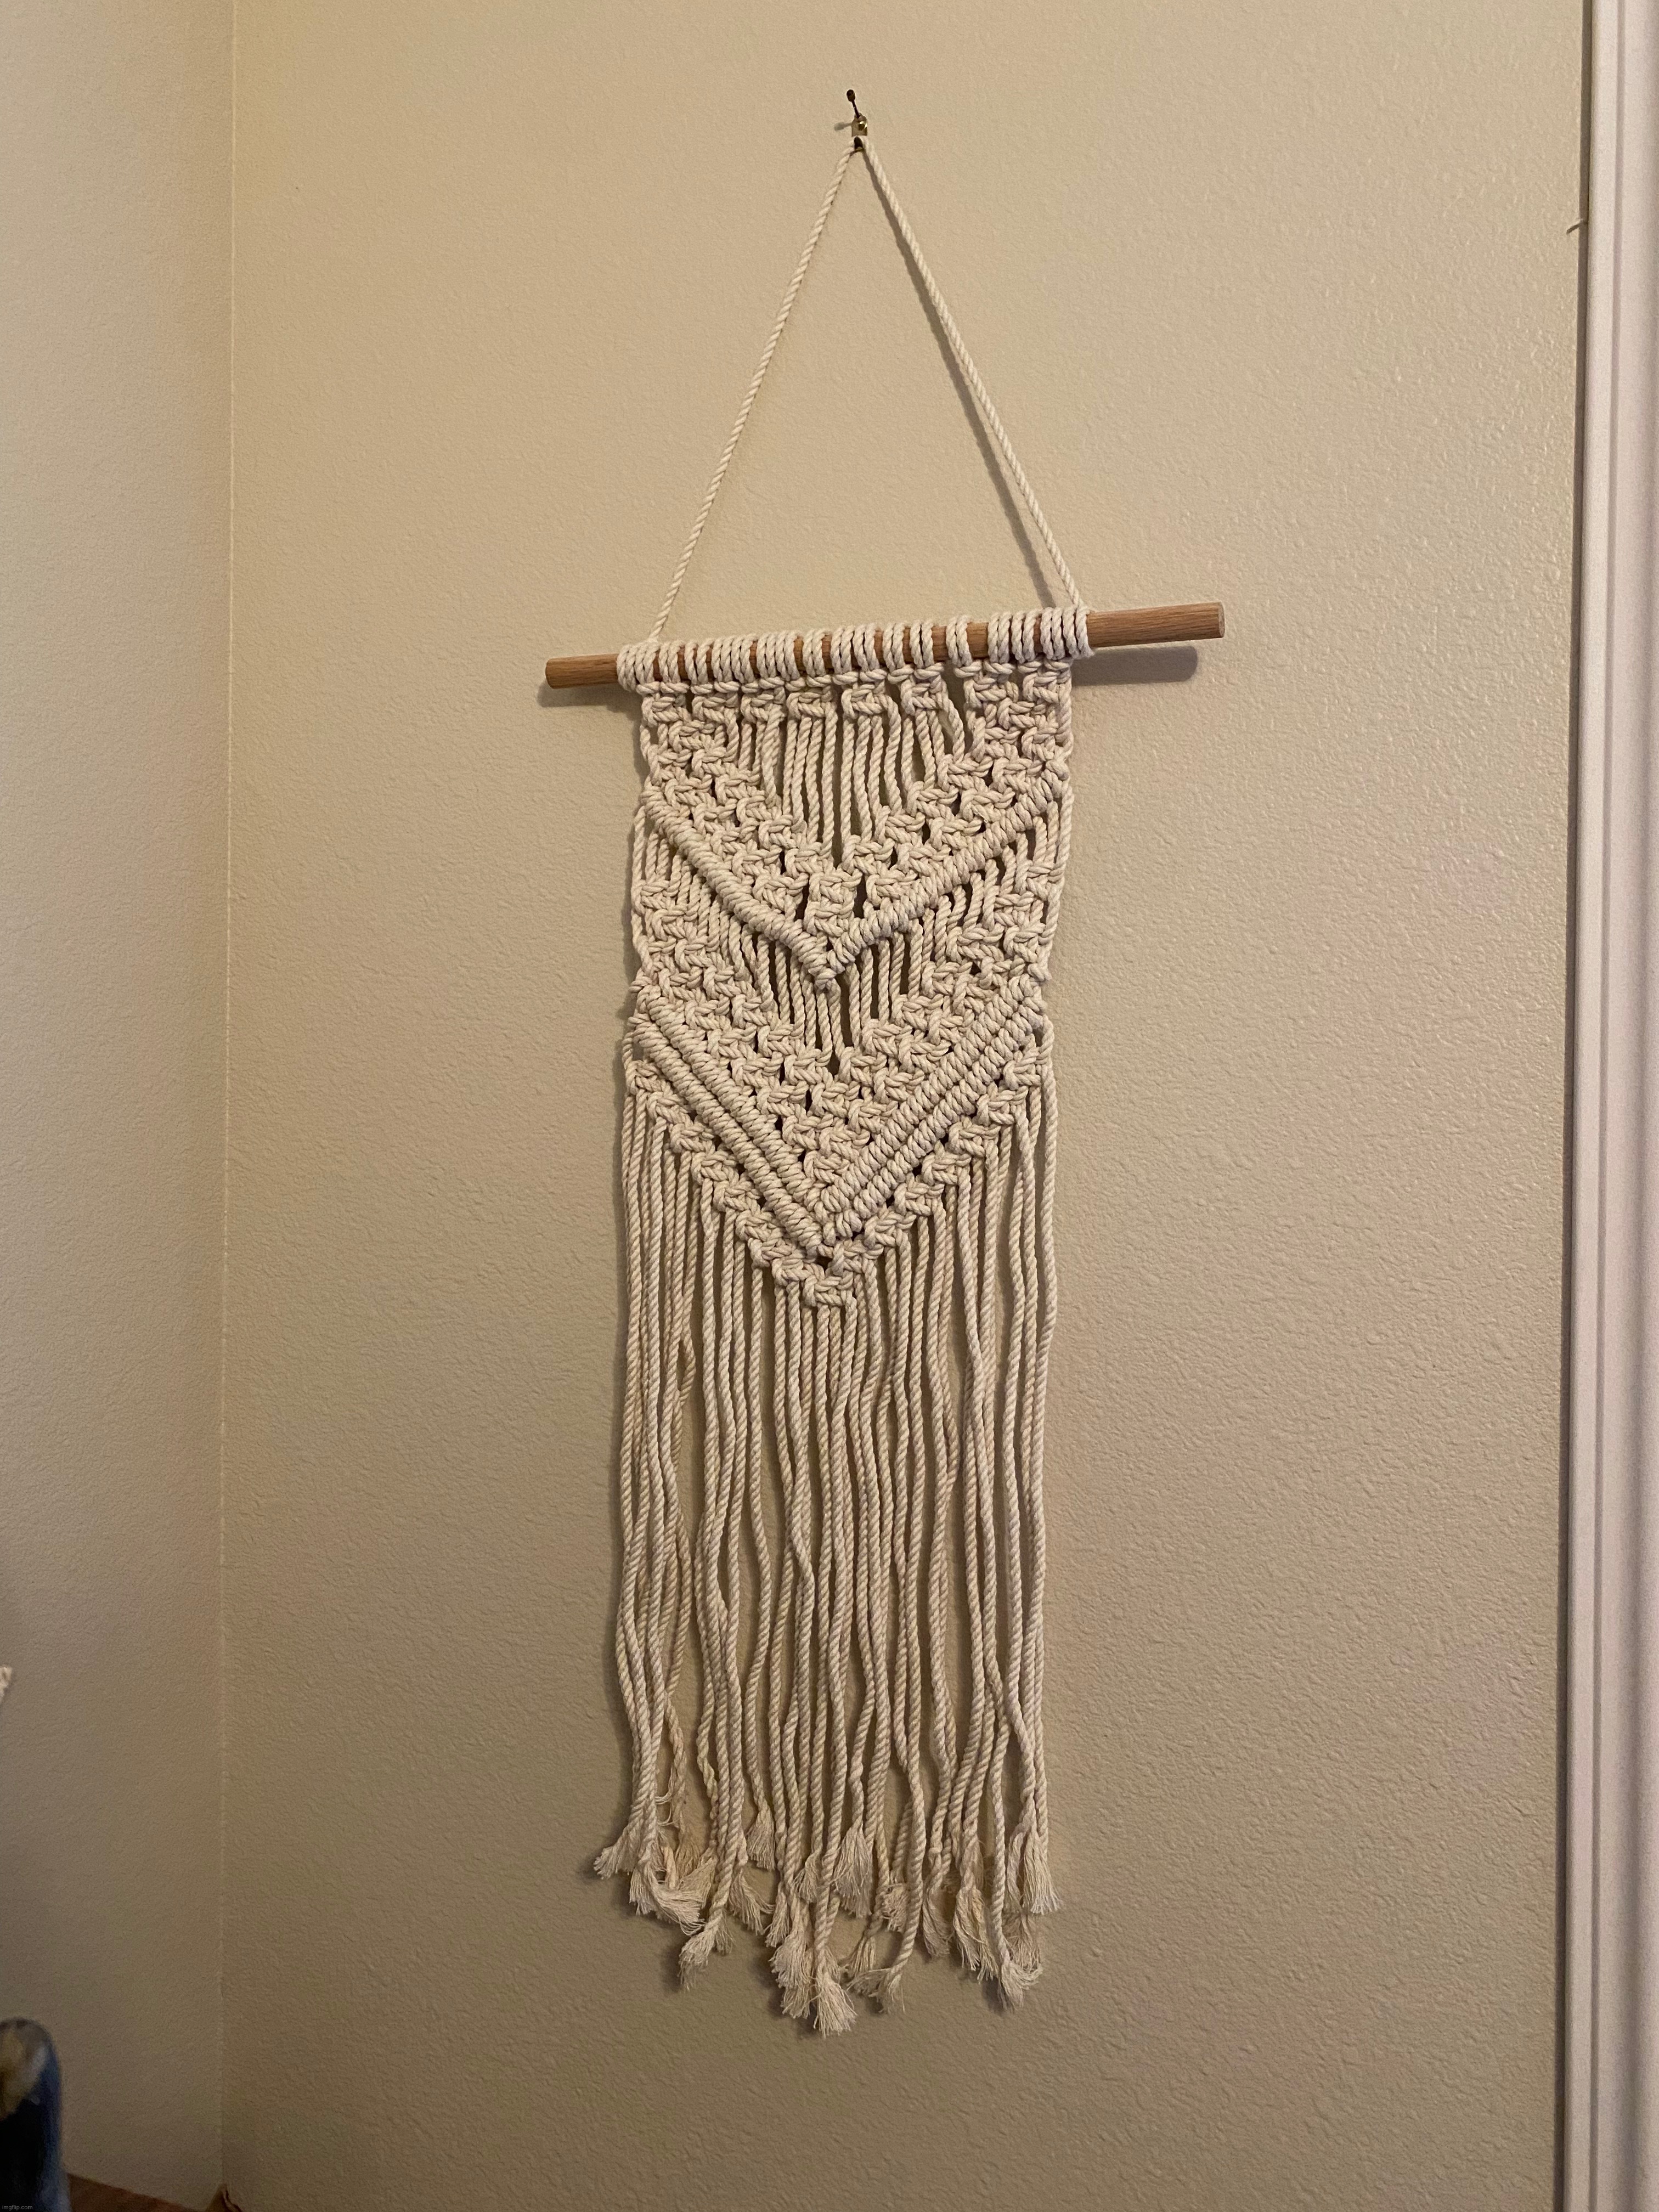 my friend made this for me :) | image tagged in made it herself,friend,wall hanging craft | made w/ Imgflip meme maker